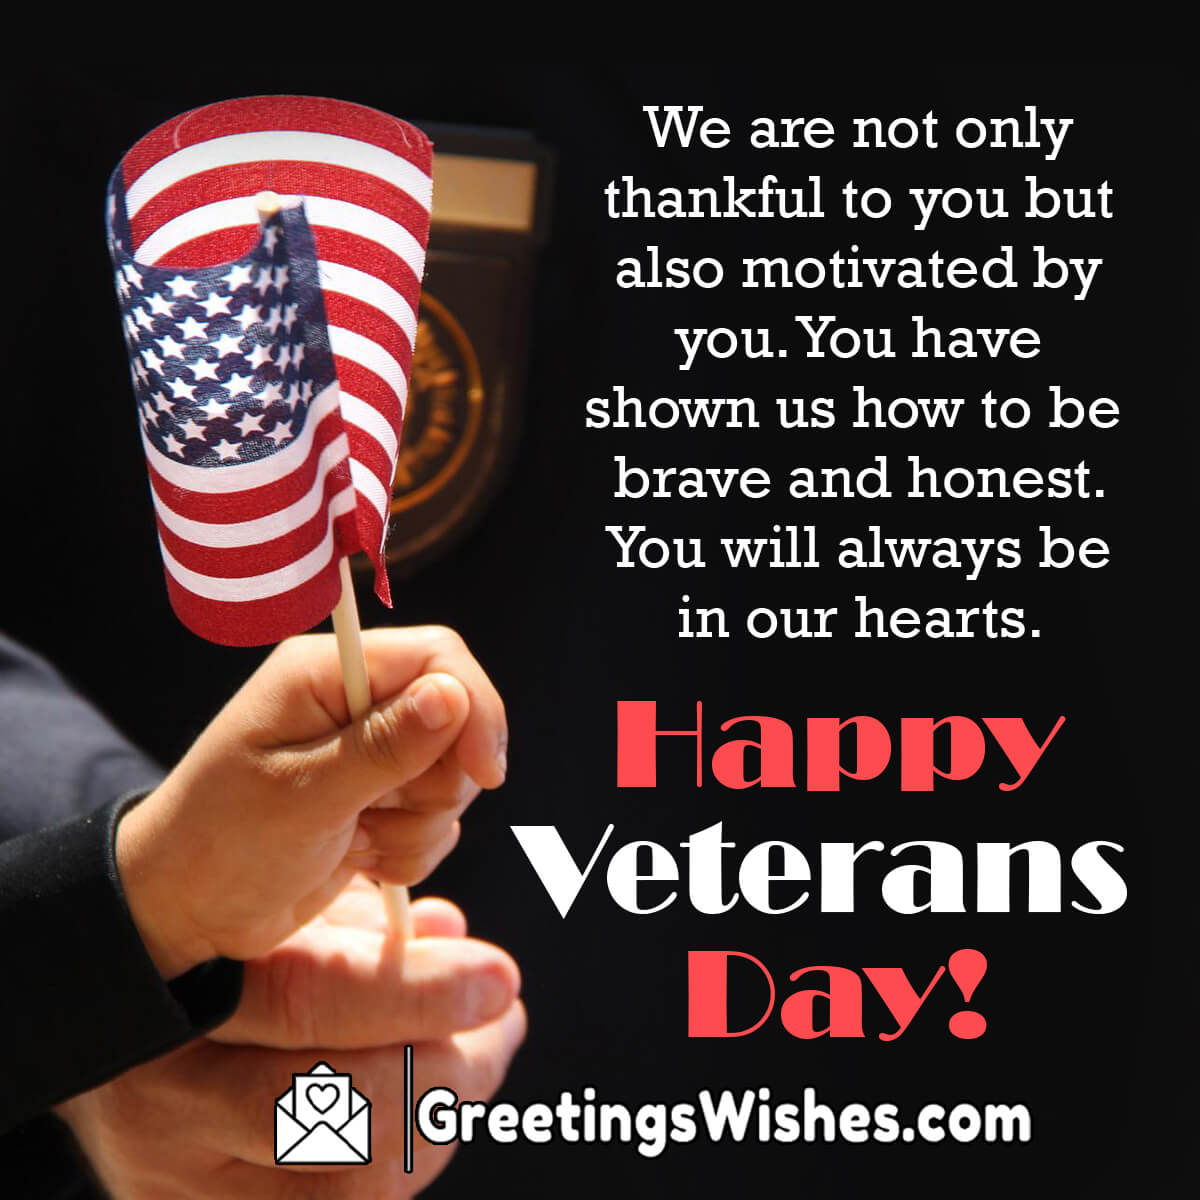 Veteran’s Day Wishes Messages (11 November)